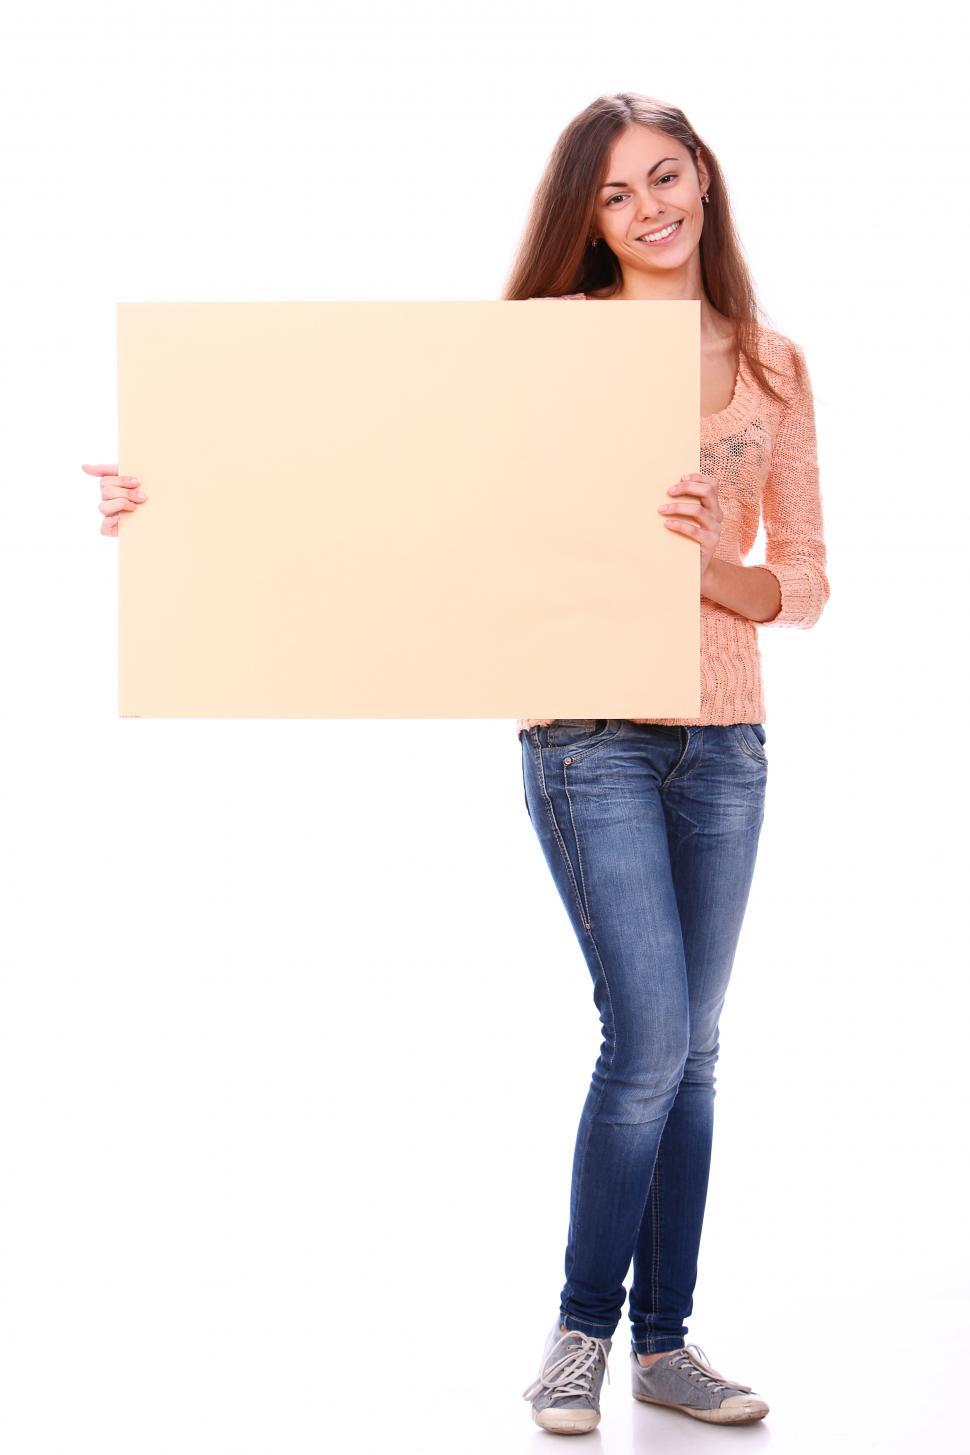 Free Image of Young woman with big blank sign 